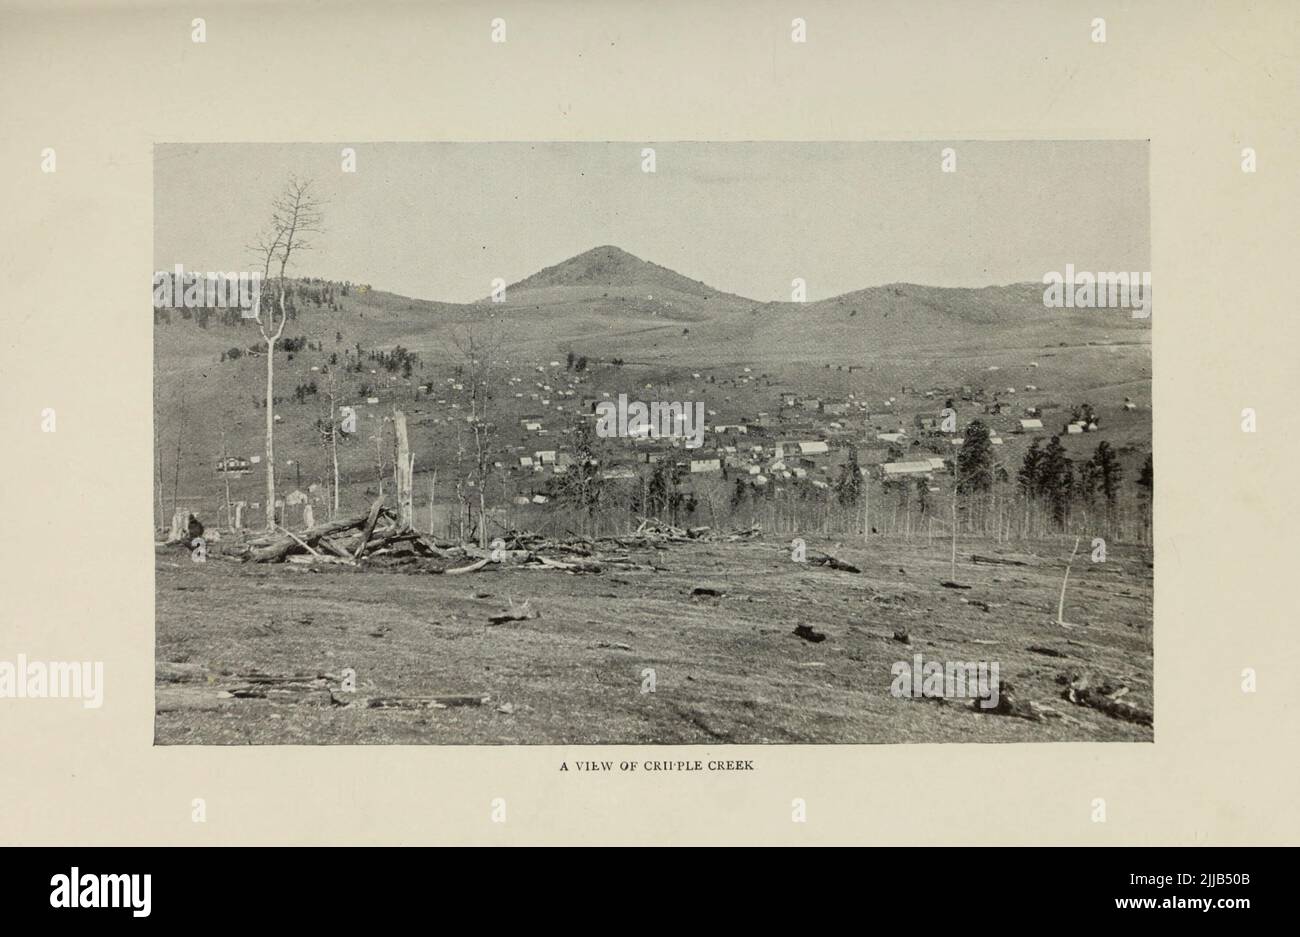 A View of Cripple Creek, Colorado from the article ' COLORADO'S NEW GOLD-CAMPS ' By Prof. Arthur Lakes from The Engineering Magazine DEVOTED TO INDUSTRIAL PROGRESS Volume VII April to September, 1894 NEW YORK The Engineering Magazine Co Stock Photo